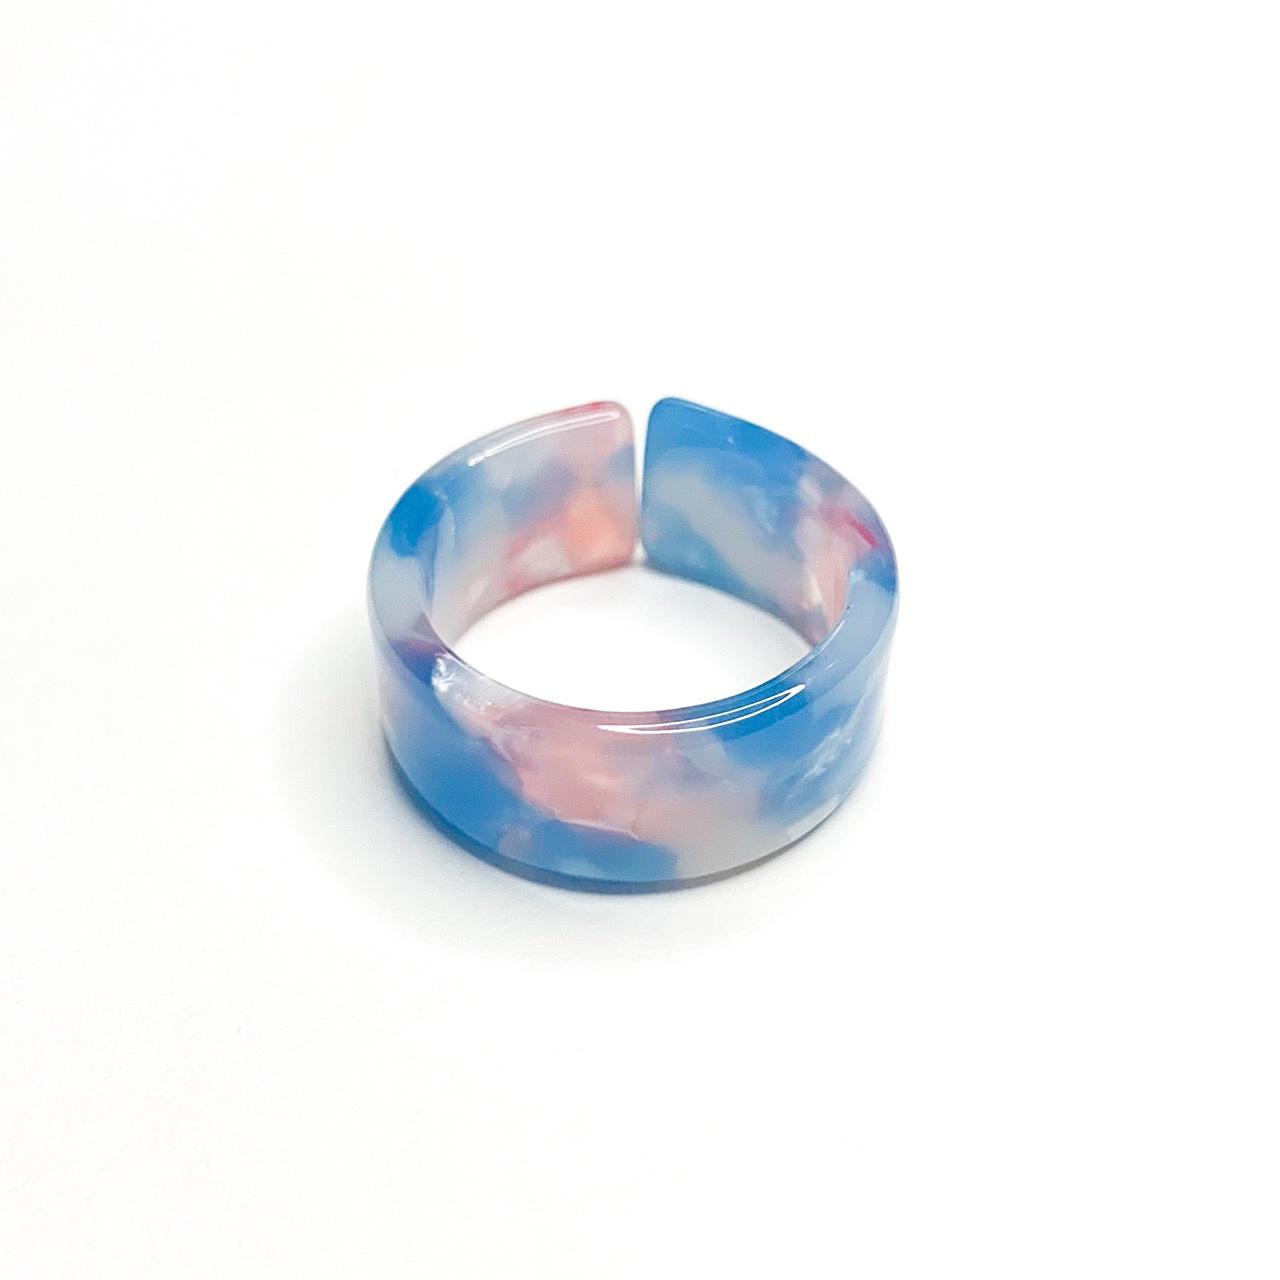 Cloudy Resin Ring size 8 brand new msg me for - Depop